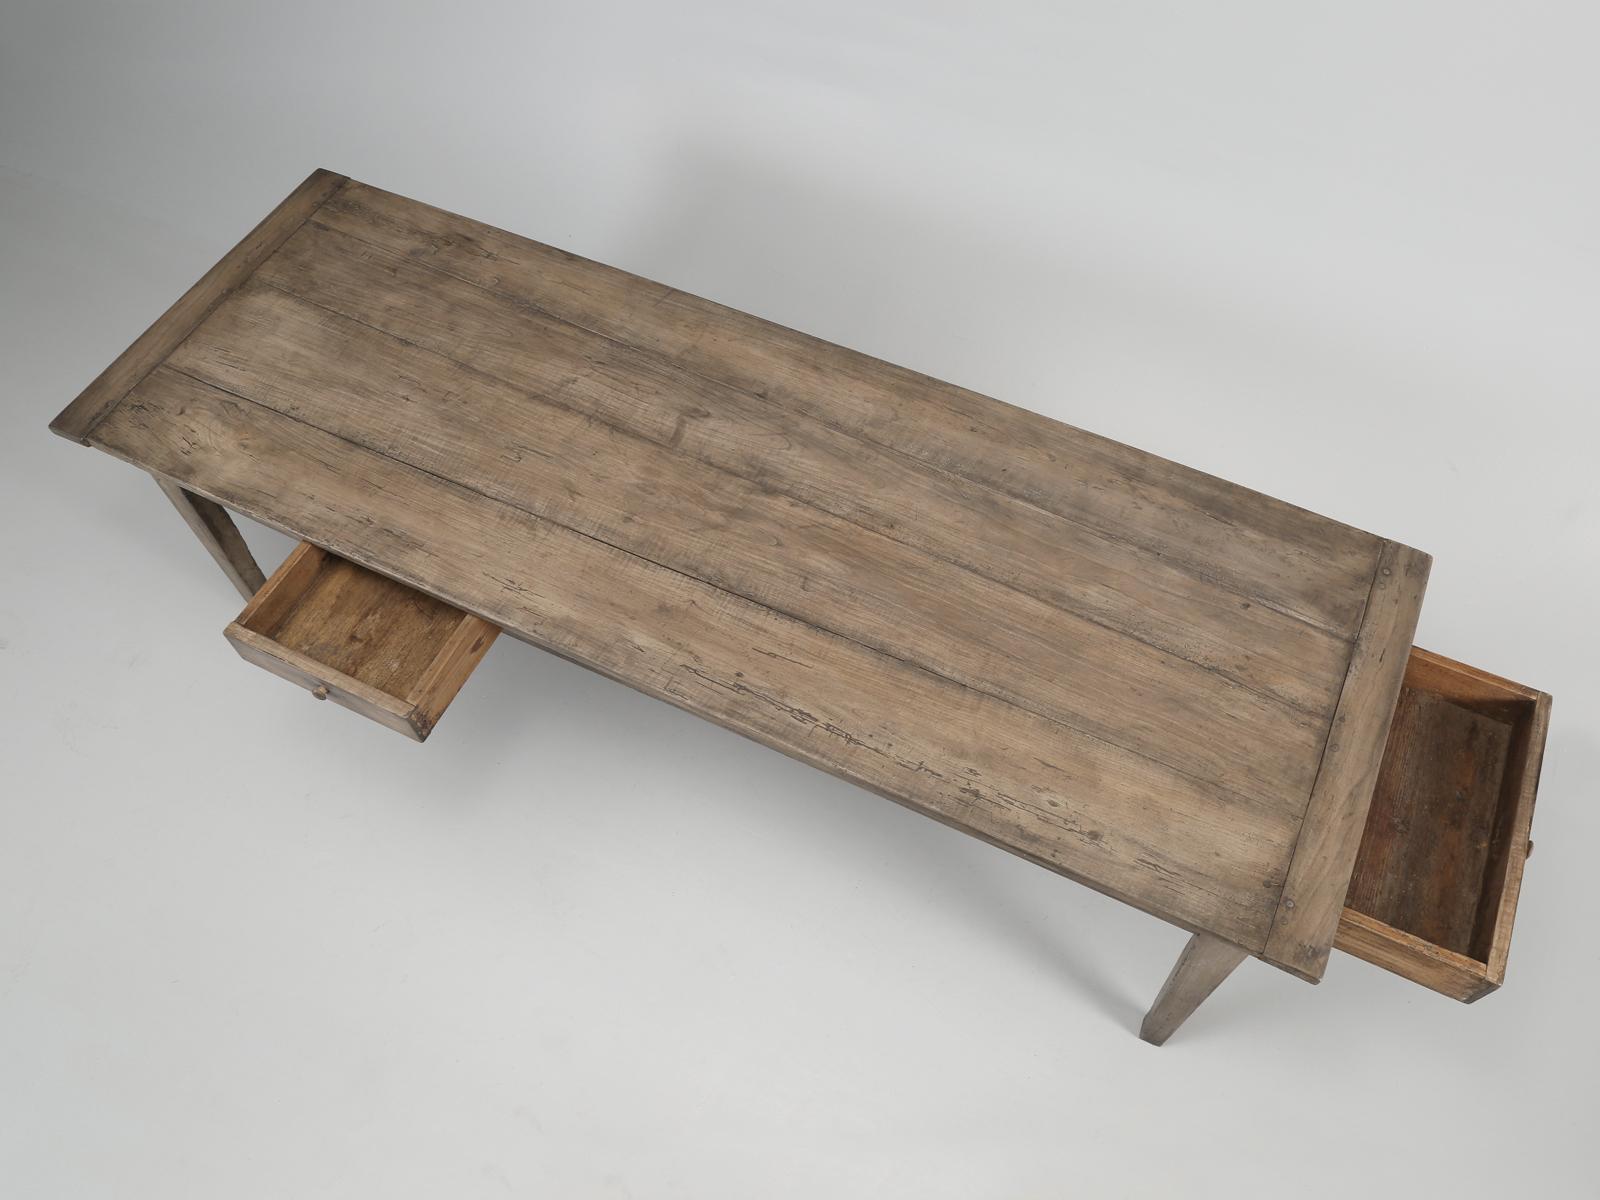 Antique French farm table from the south of France in the town of Marseille, with the preferred tapered legs and one small side drawer and one huge drawer at the end. The table has been rebuilt structurally in our Old Plank workshop as have both